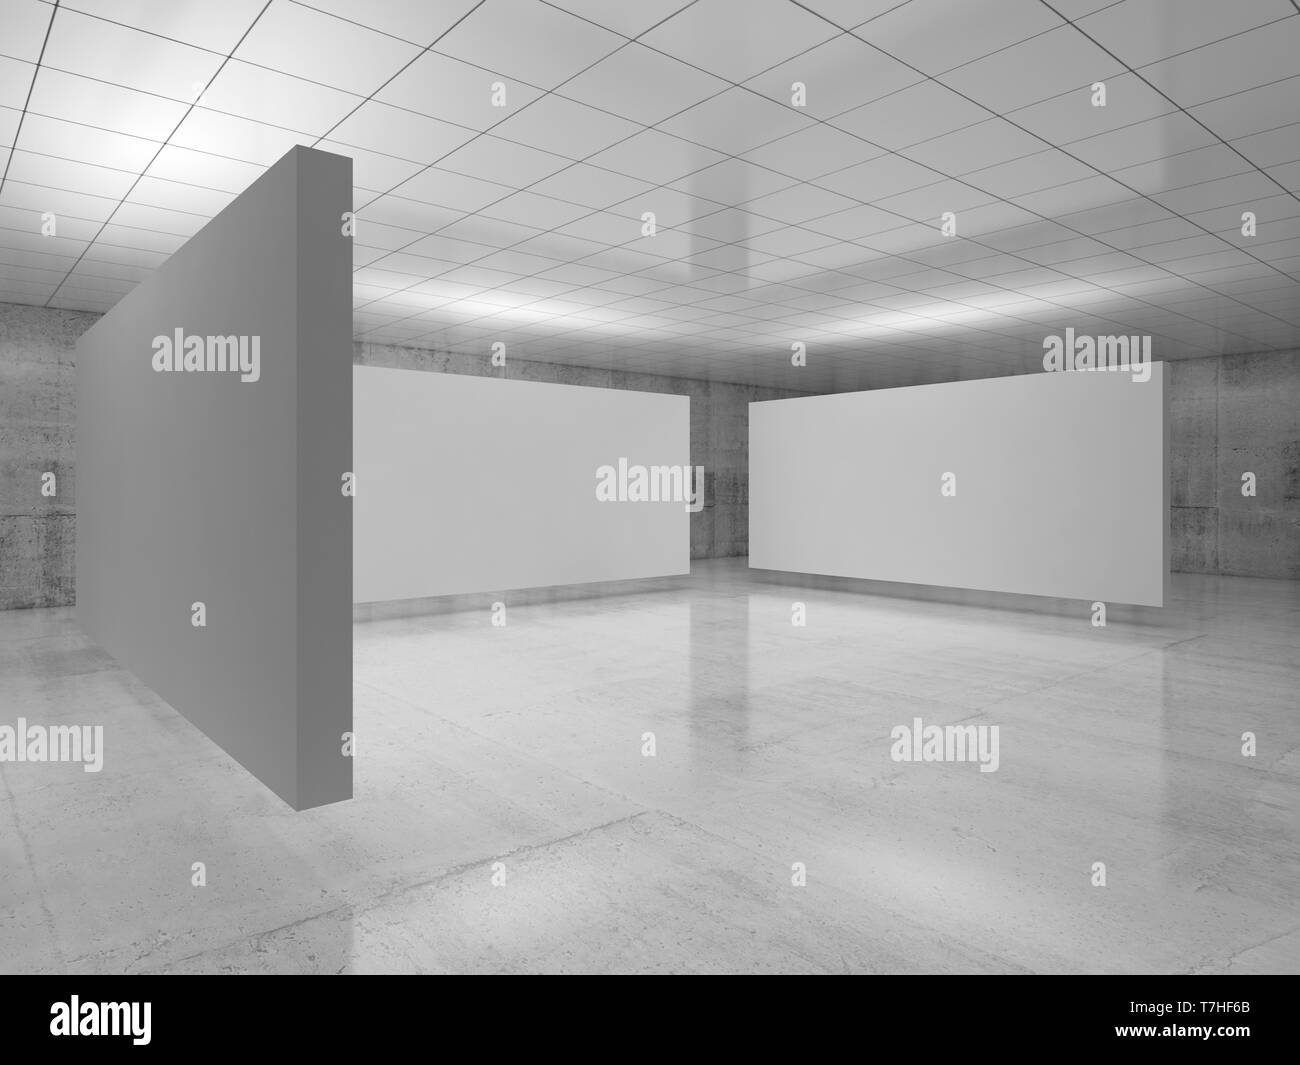 Abstract empty minimalist interior, three white stands installation levitating in exhibition gallery with walls made of polished concrete and shiny ce Stock Photo